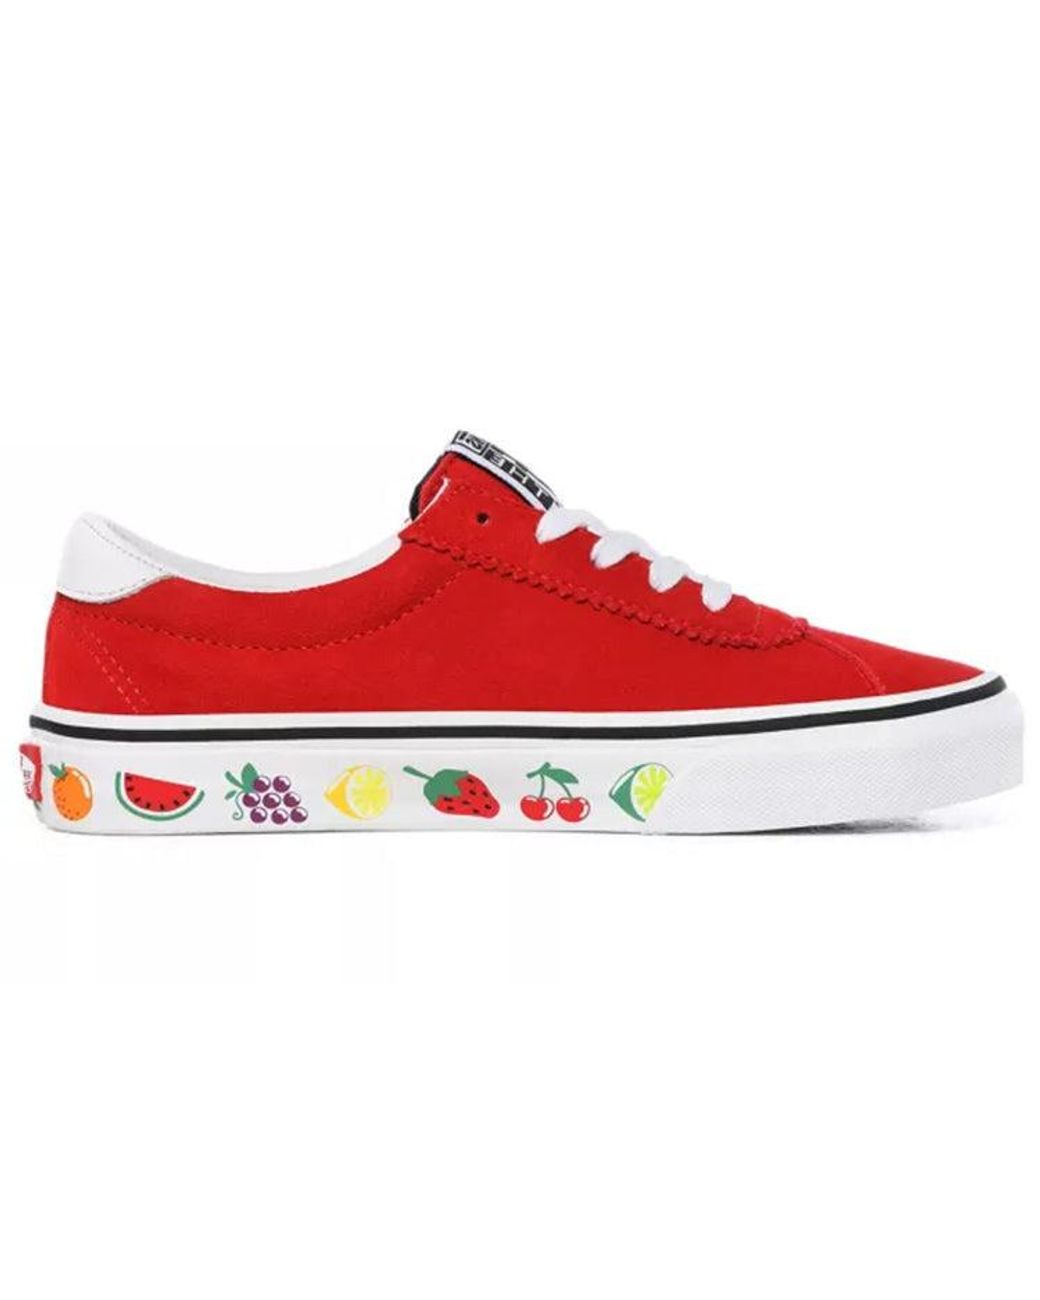 Vans Sports Red Fruit Retro Casual Skateboarding Shoes Red | Lyst